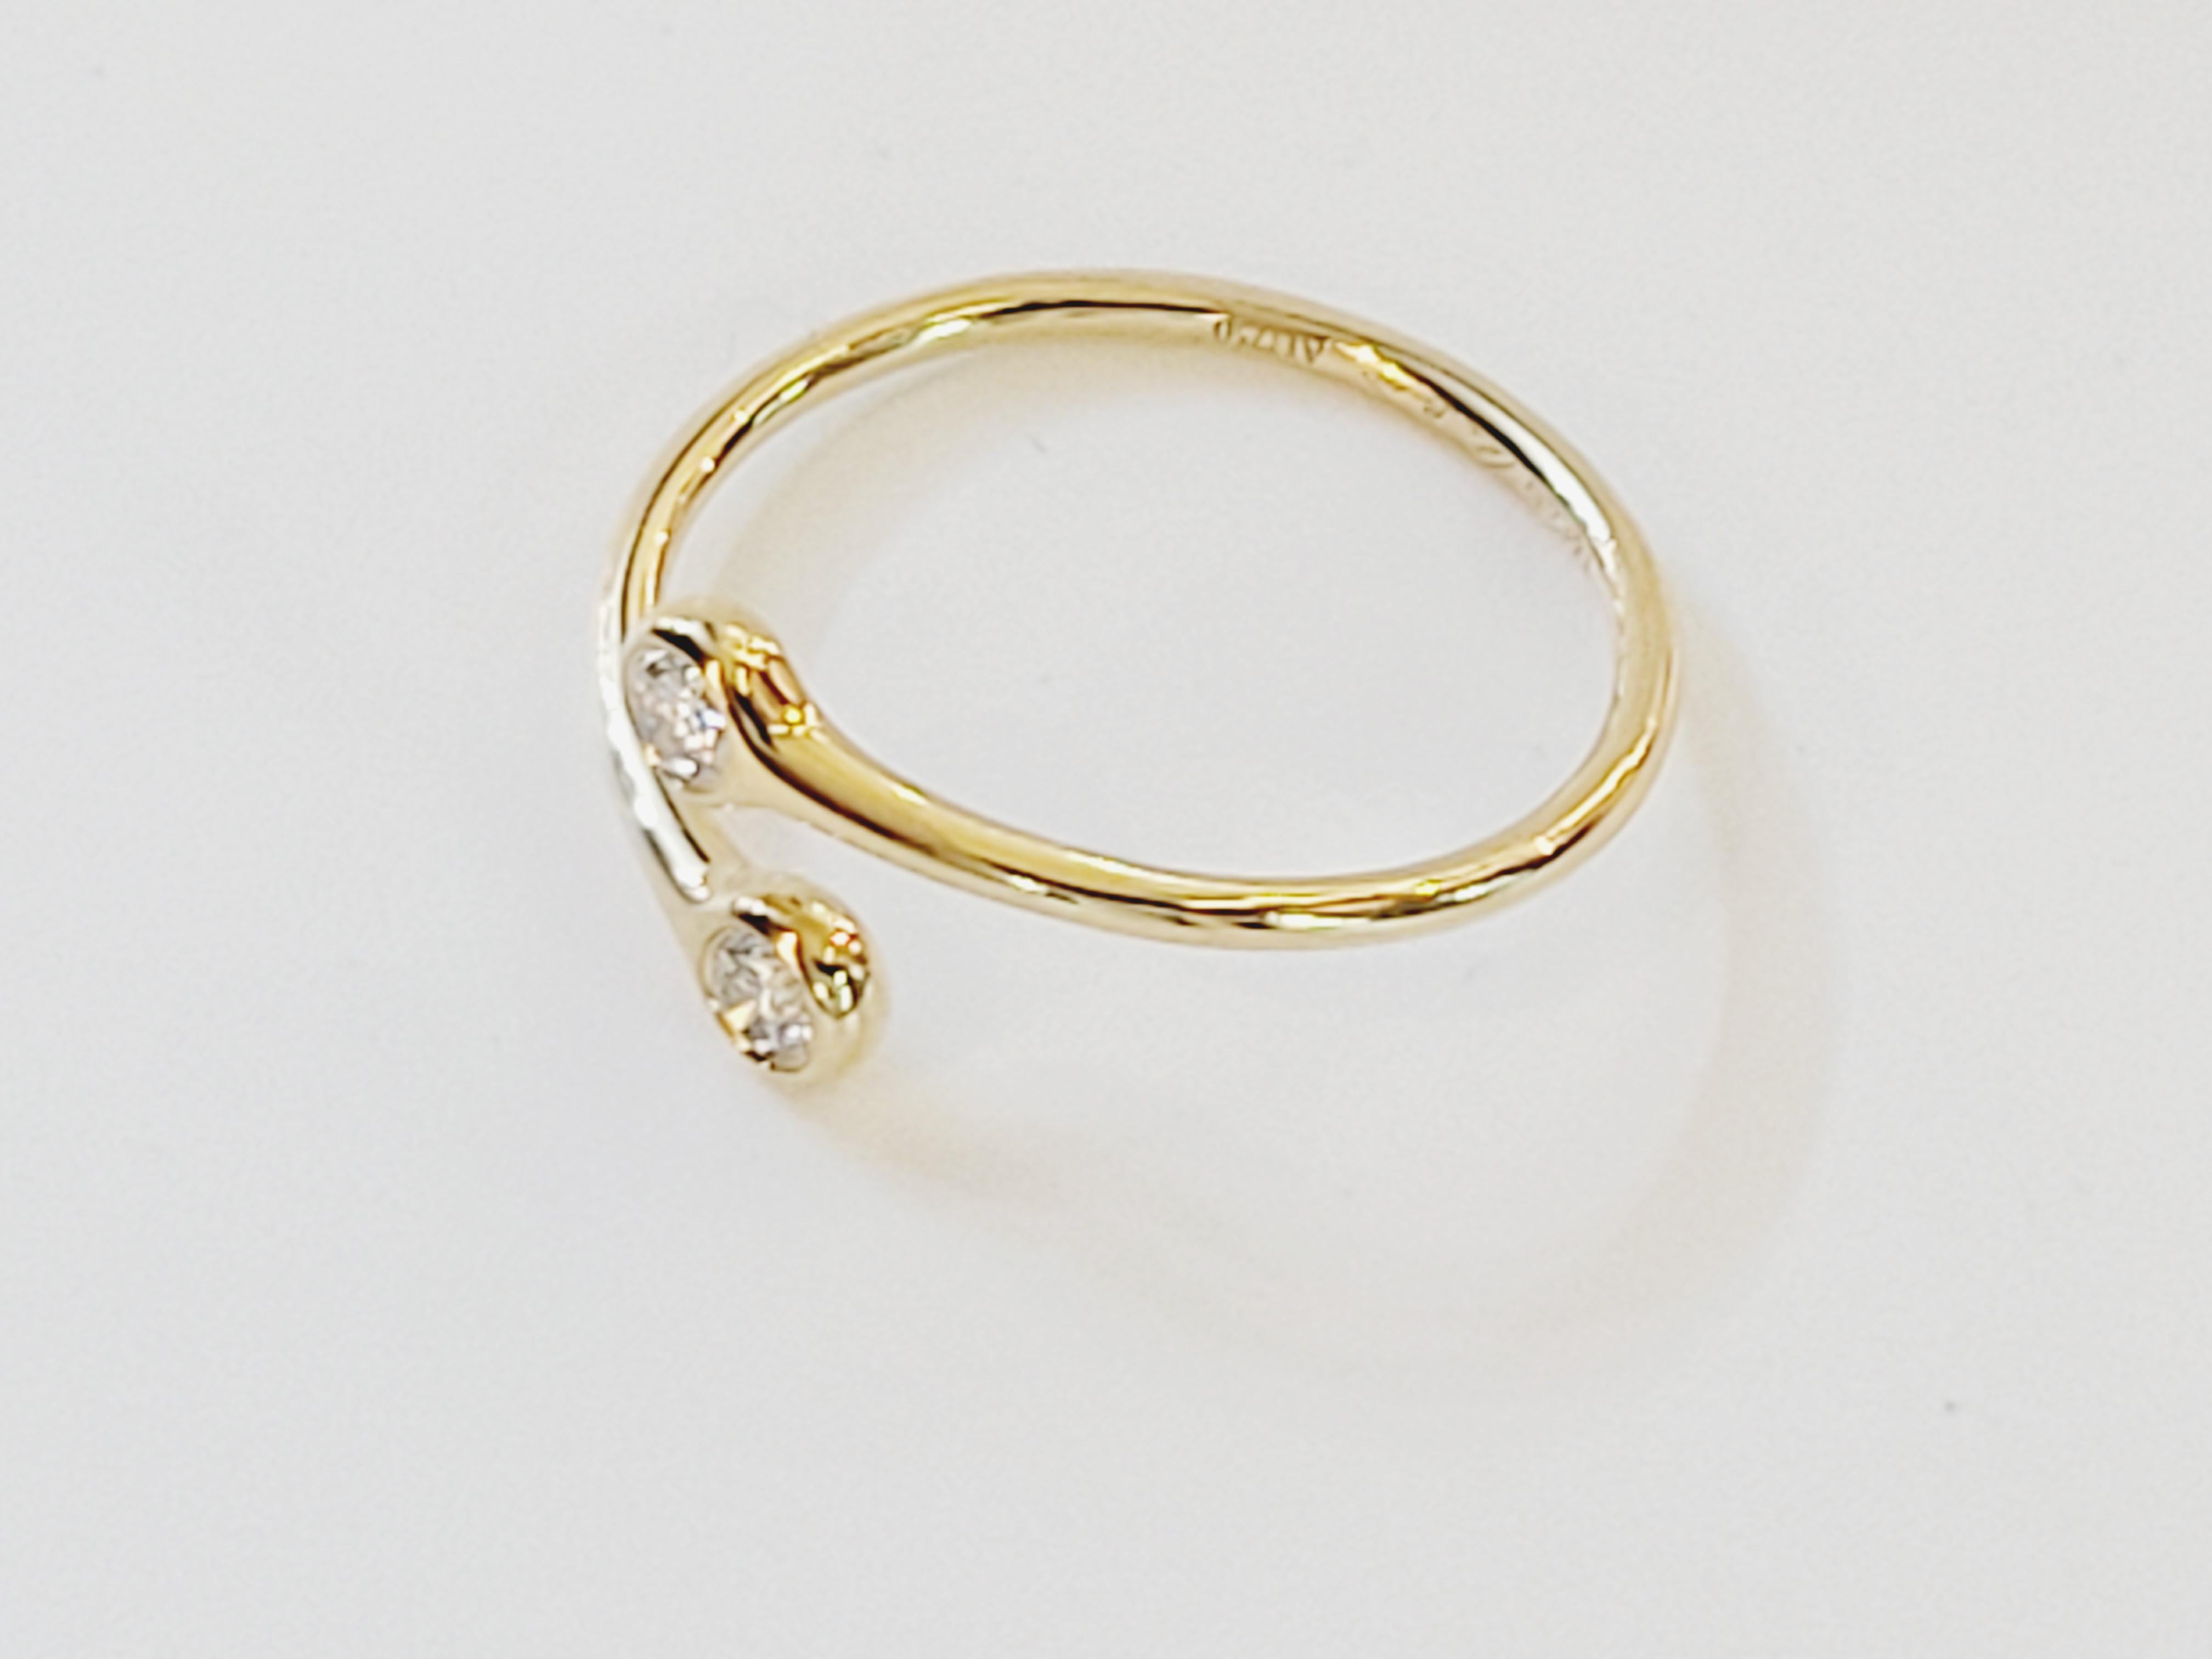 Brand tiffany & co
Mint condition
Type ring
Ring size 6
Main stone diamond
Metal yellow gold
metal purity 18k
Ring 1.5g
Comes with tiffany & co box 
